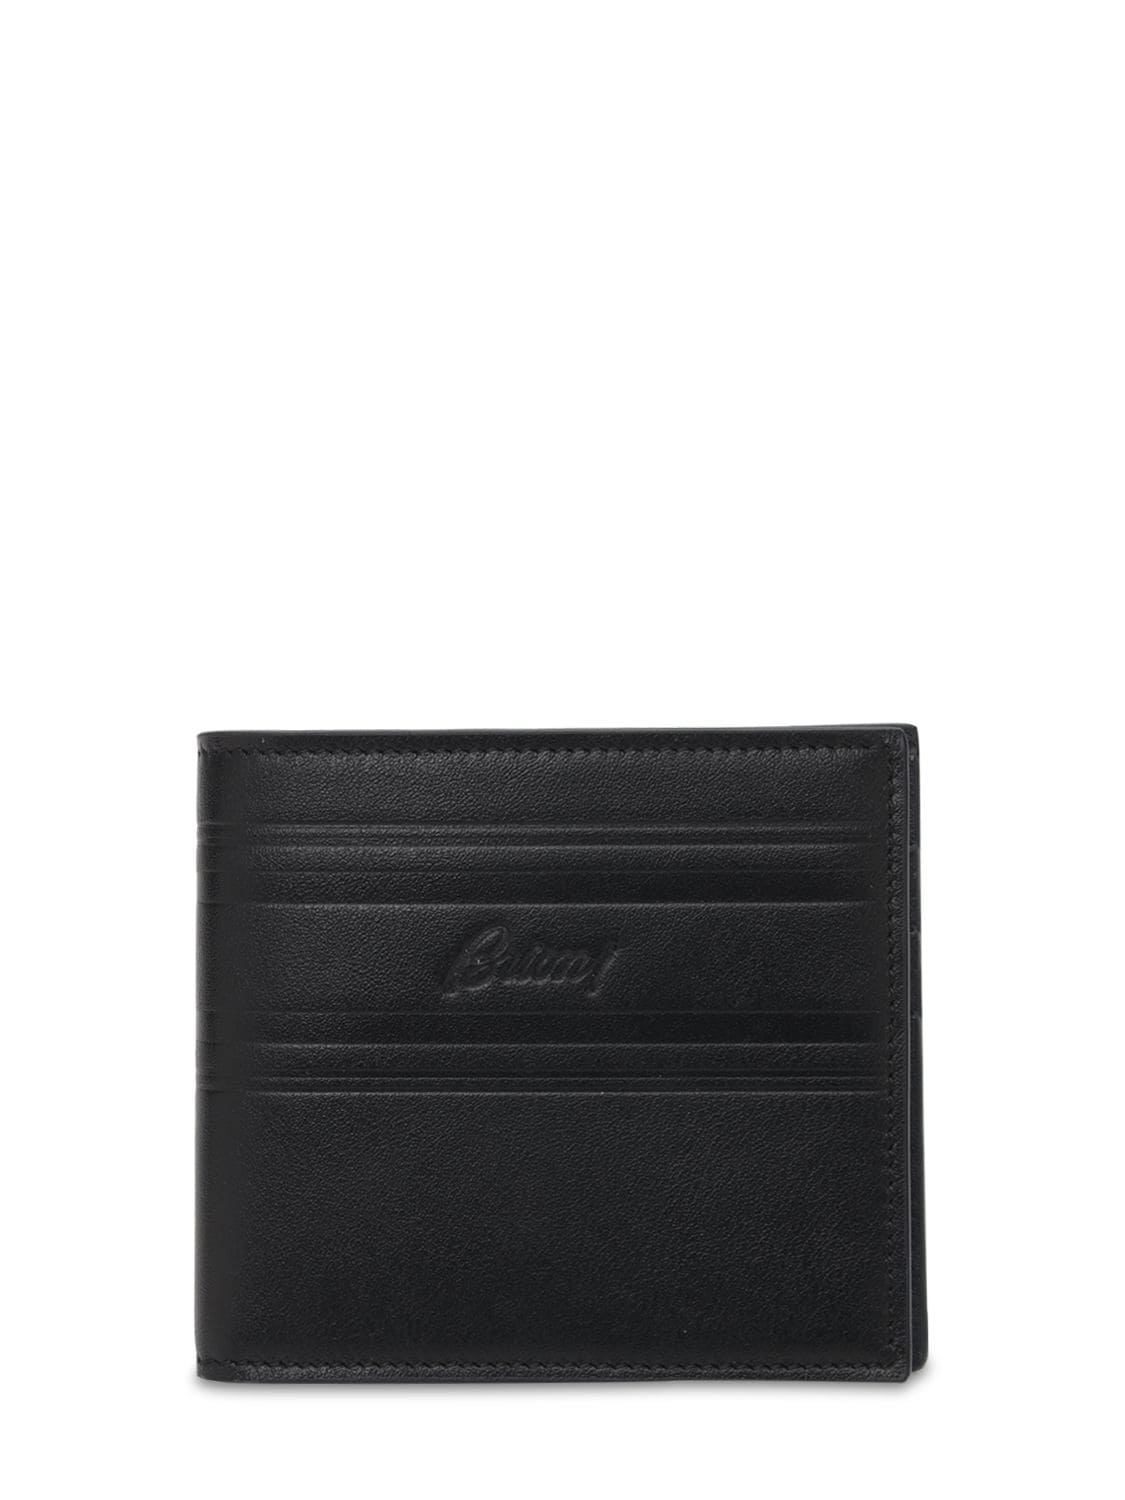 Brioni CLASSIC LEATHER WALLET